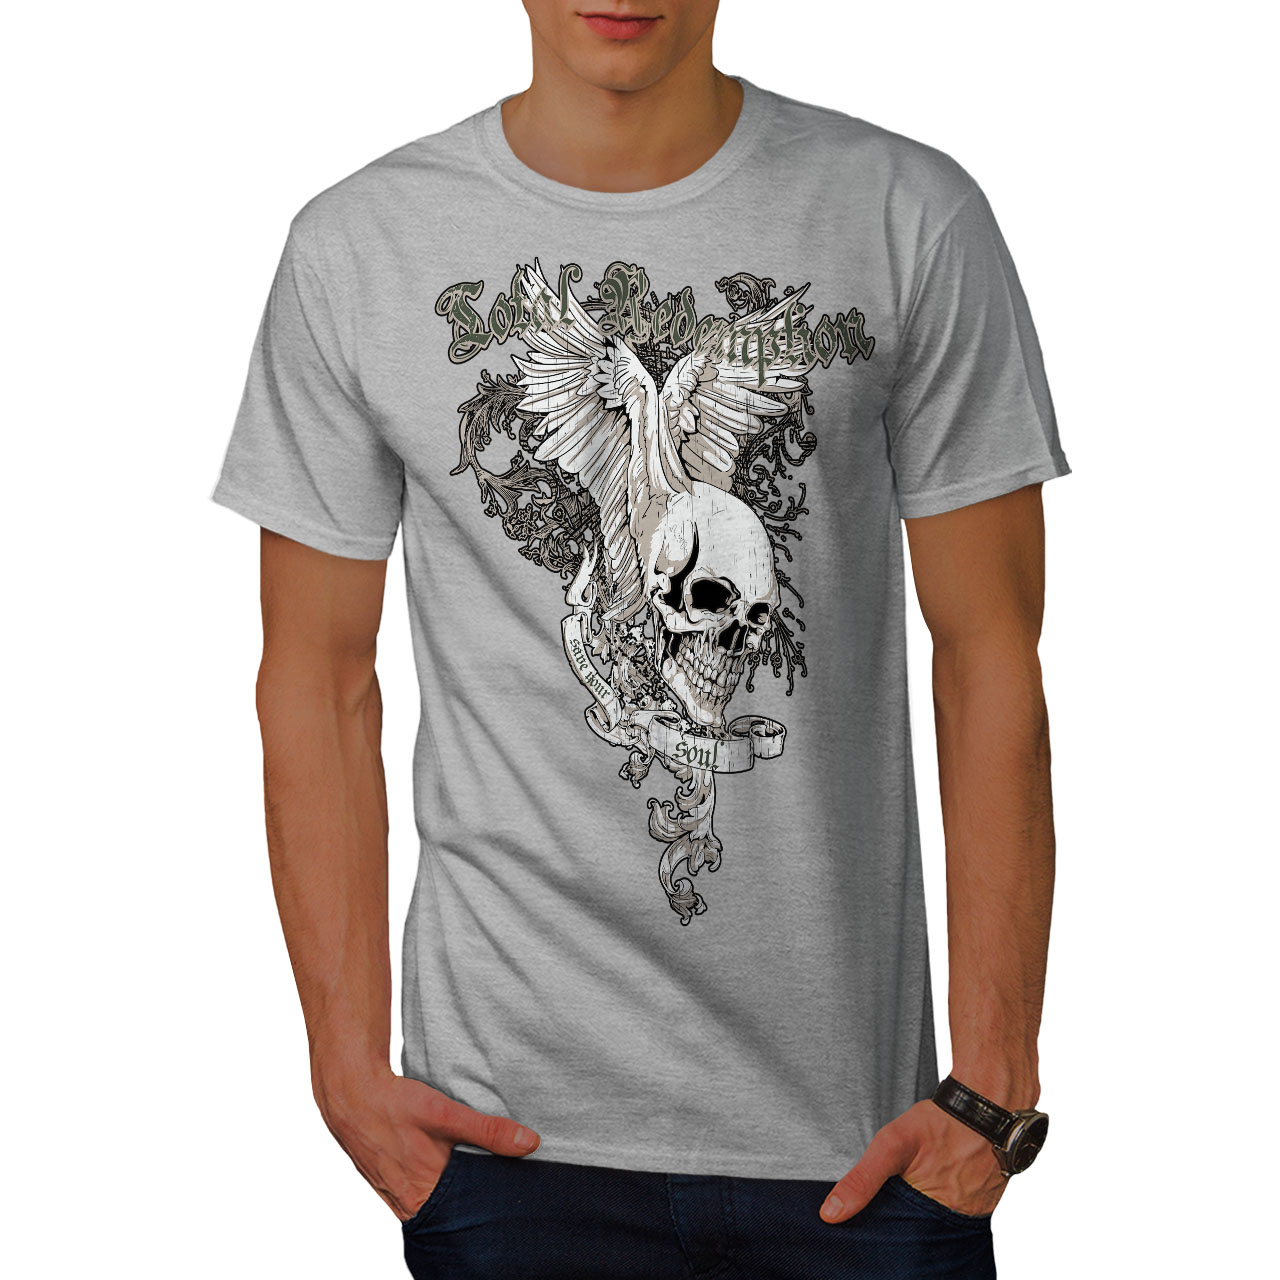 Wellcoda Total Coolest Skull Mens T-shirt, Save Graphic Design Printed ...